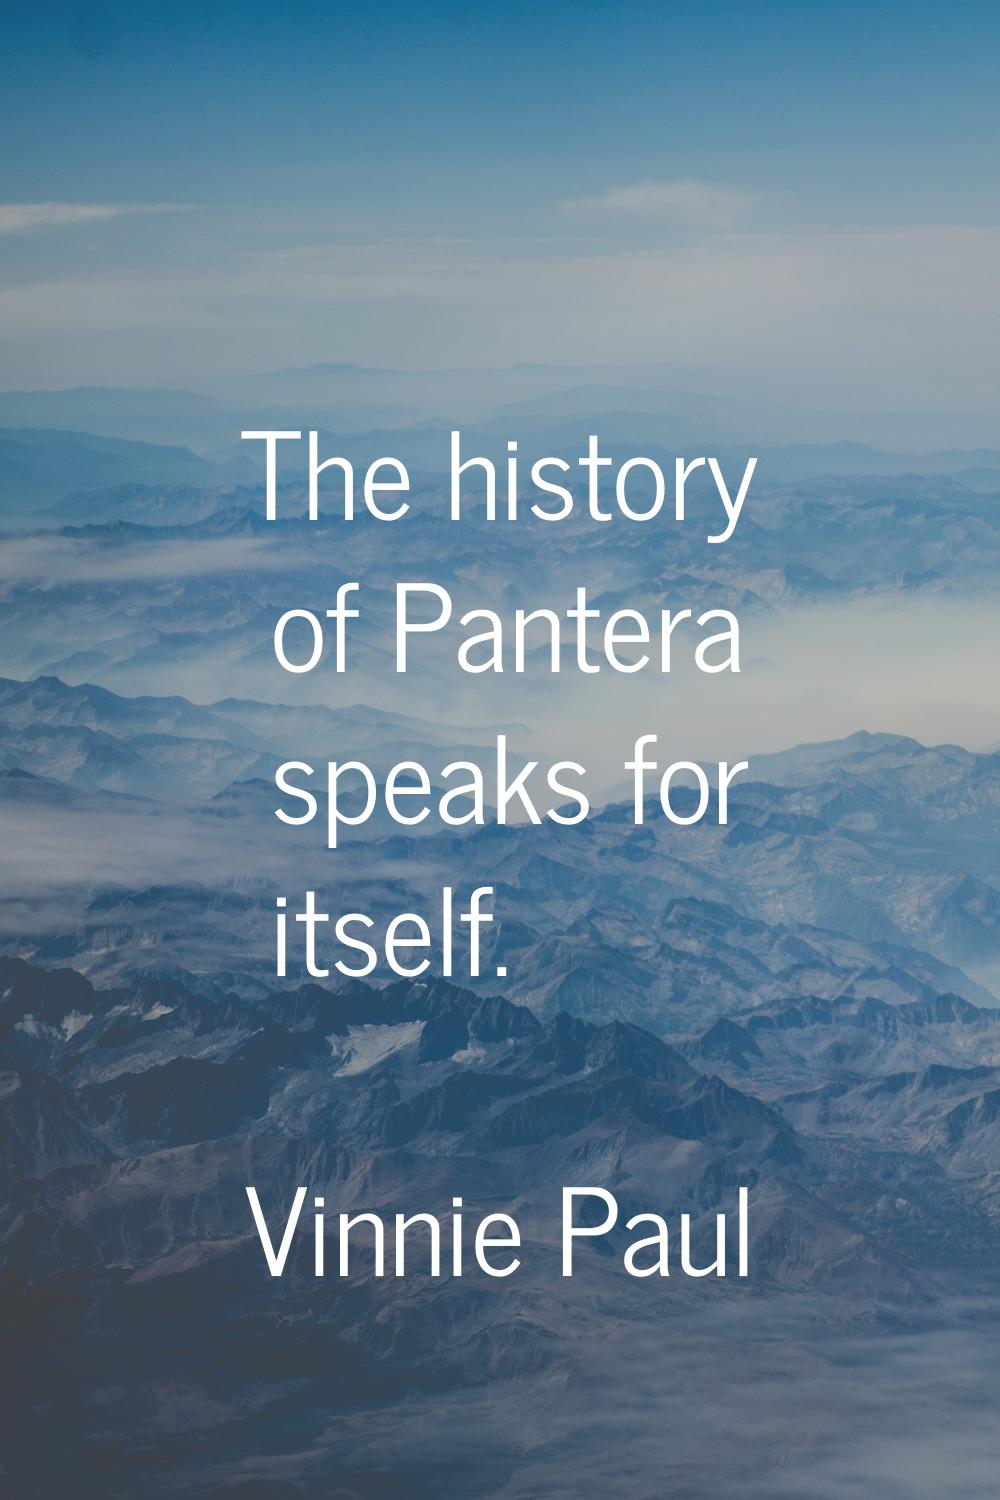 The history of Pantera speaks for itself.